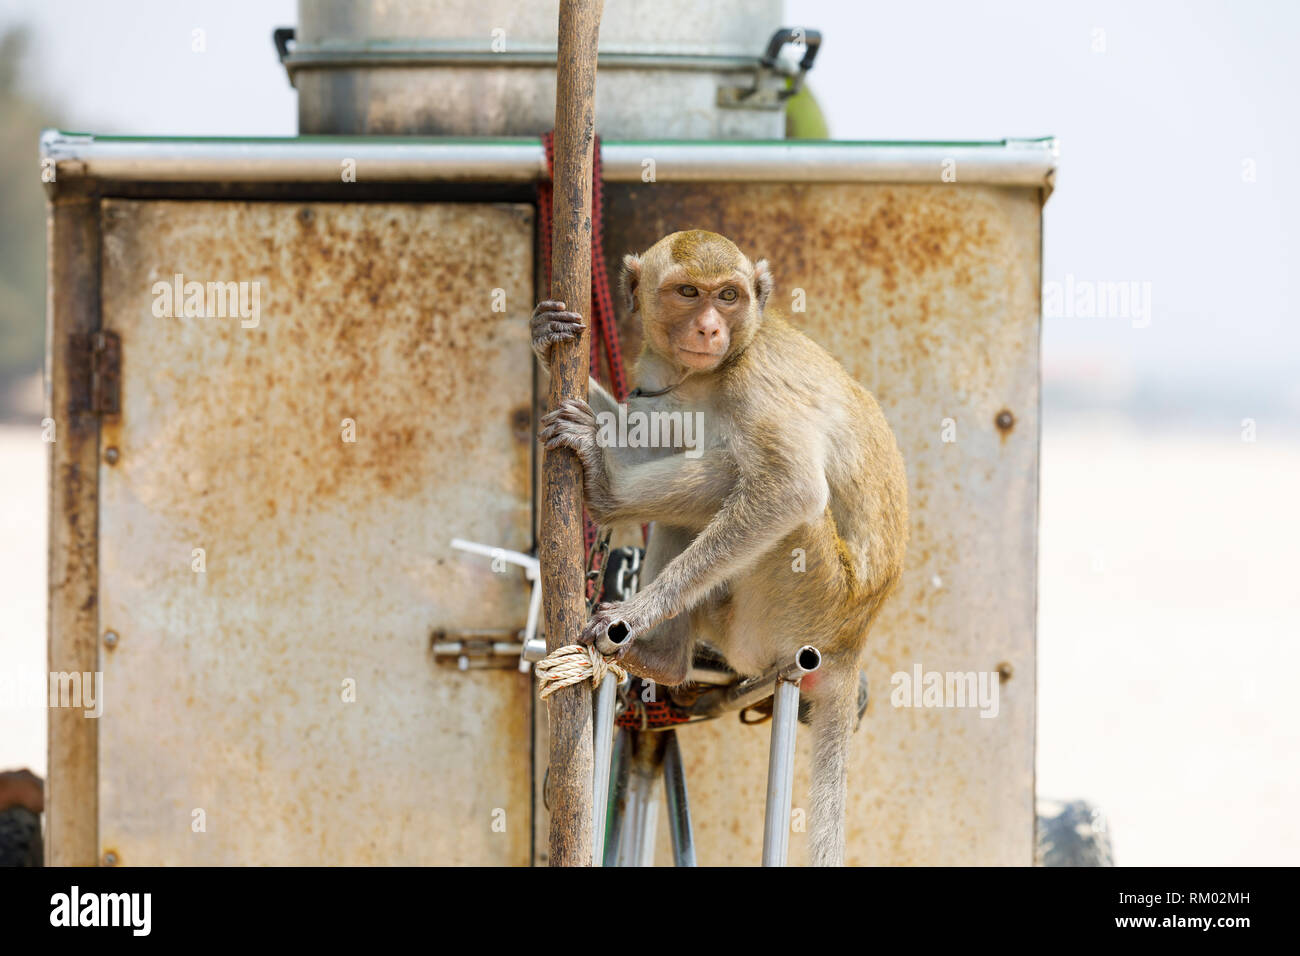 Little chained monkey or heron sits next to a rusty wall Stock Photo